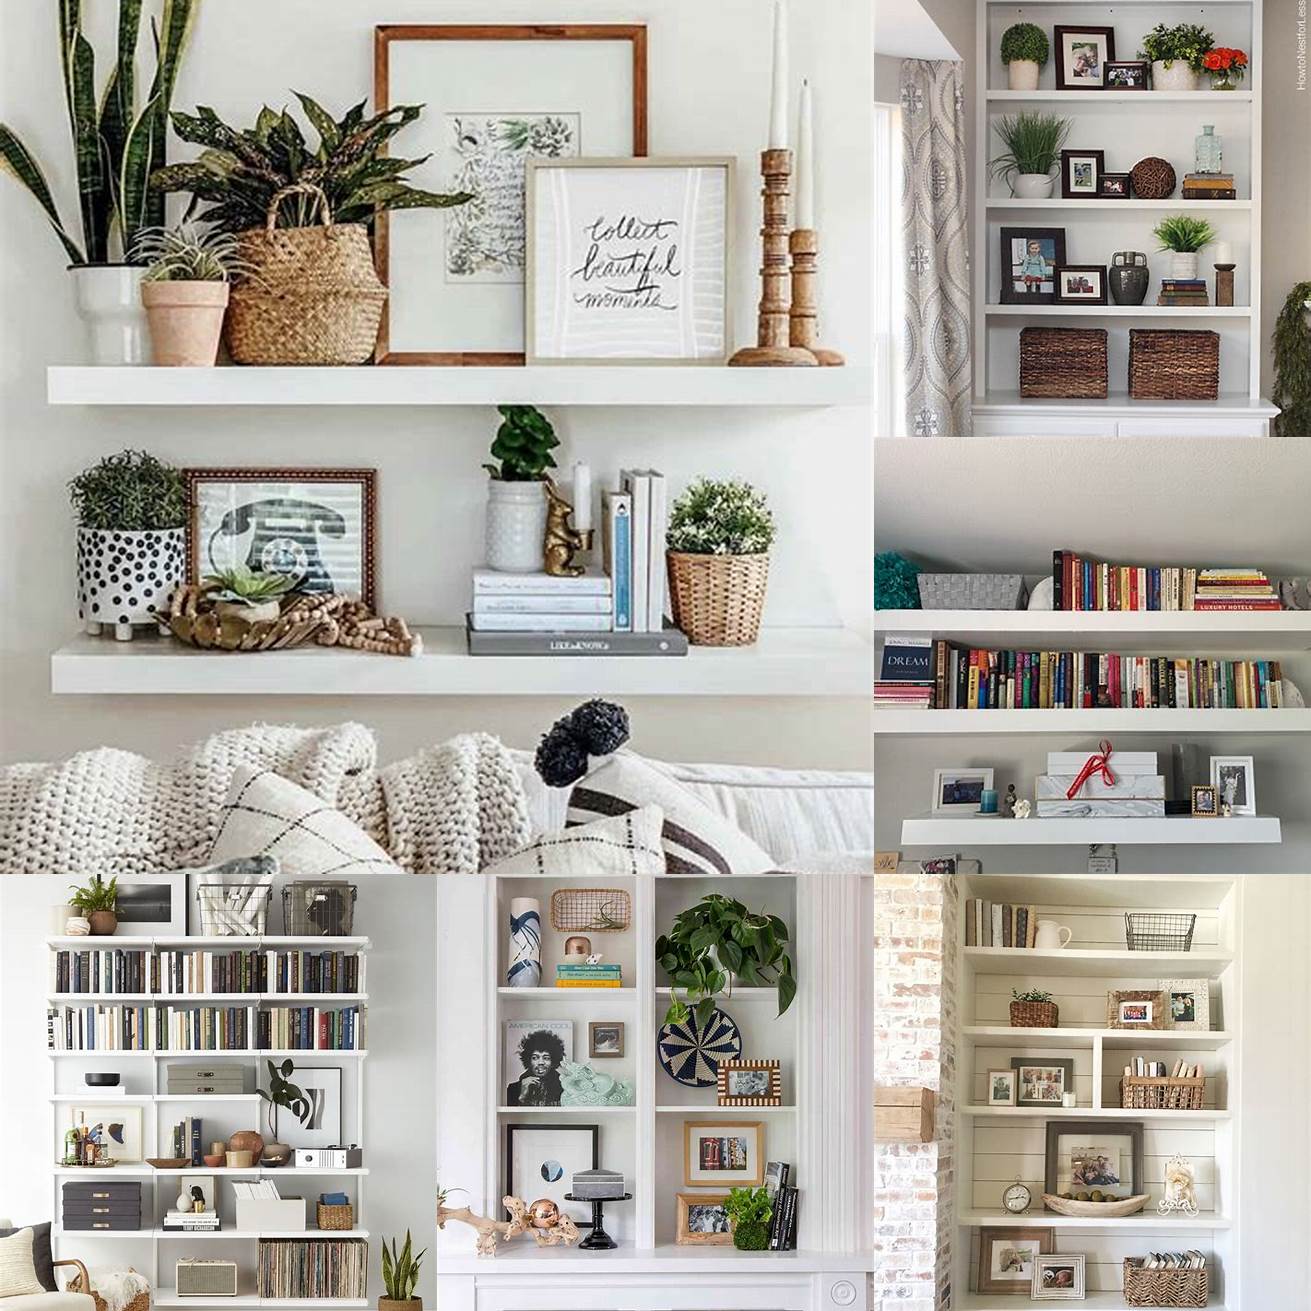 Use floating shelves to display your favorite books and decor items